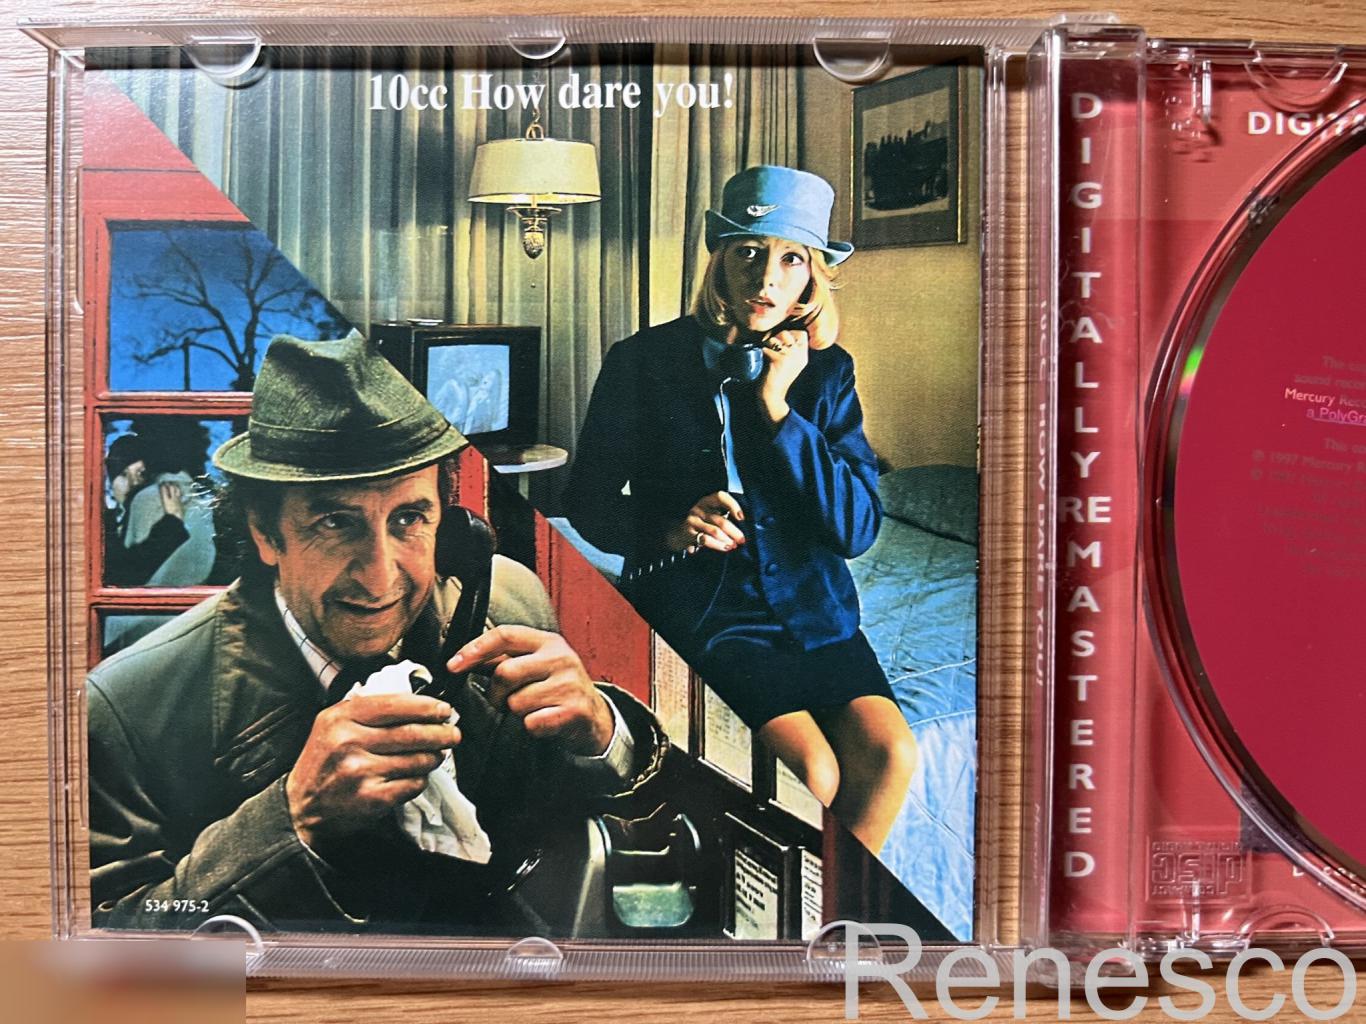 10cc – How Dare You! (Germany) (1997) (Reissue) (Remastered) 3